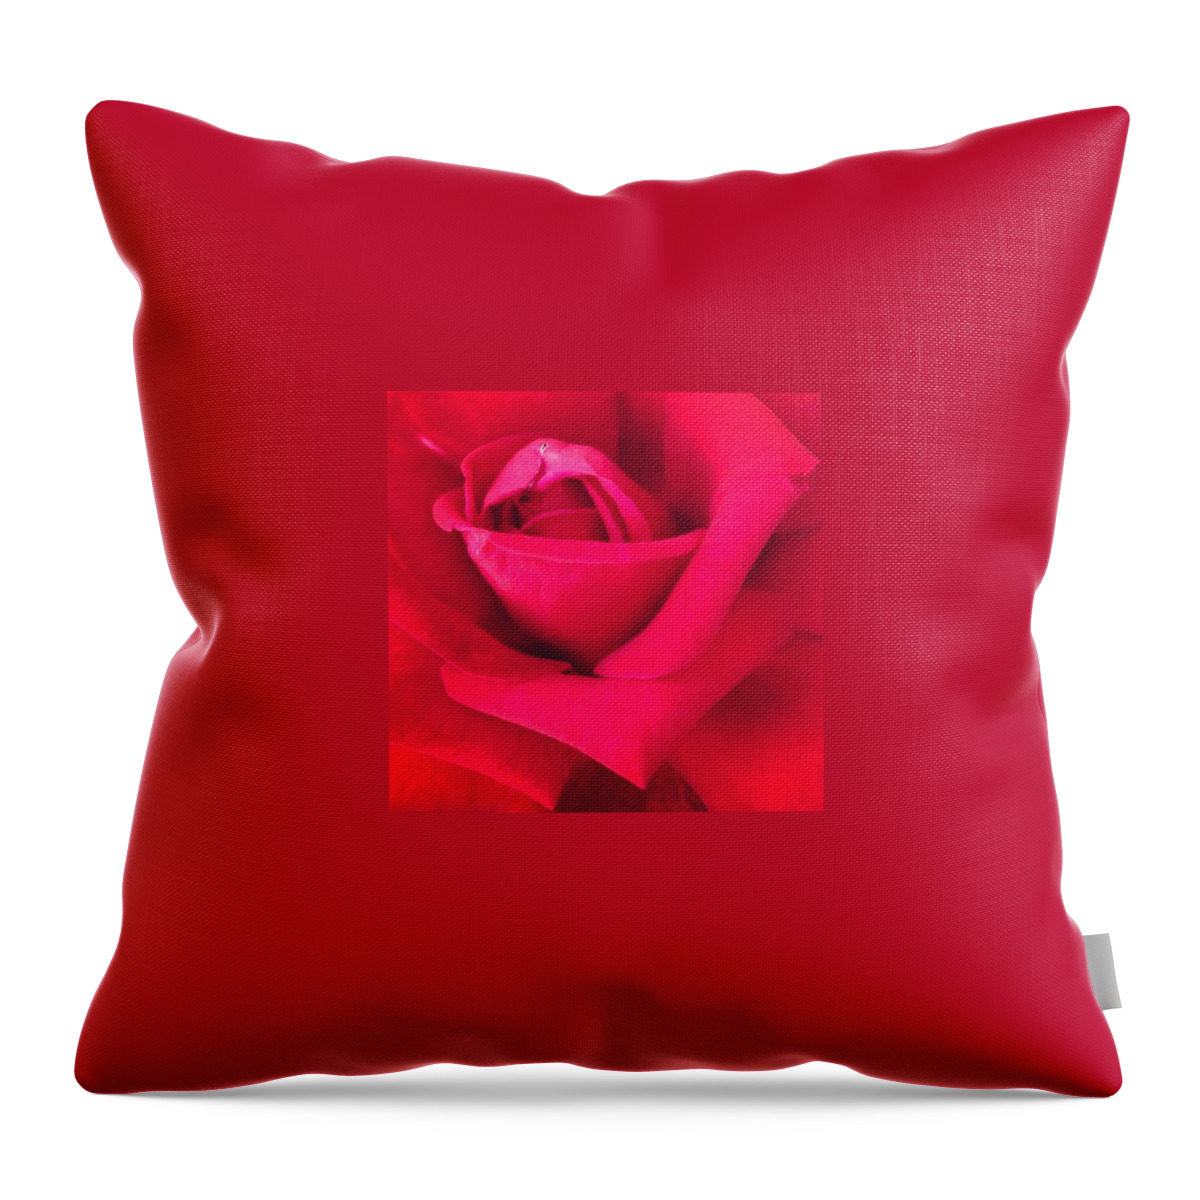 Beautiful Throw Pillow featuring the photograph Rose by Jasmine Poulos